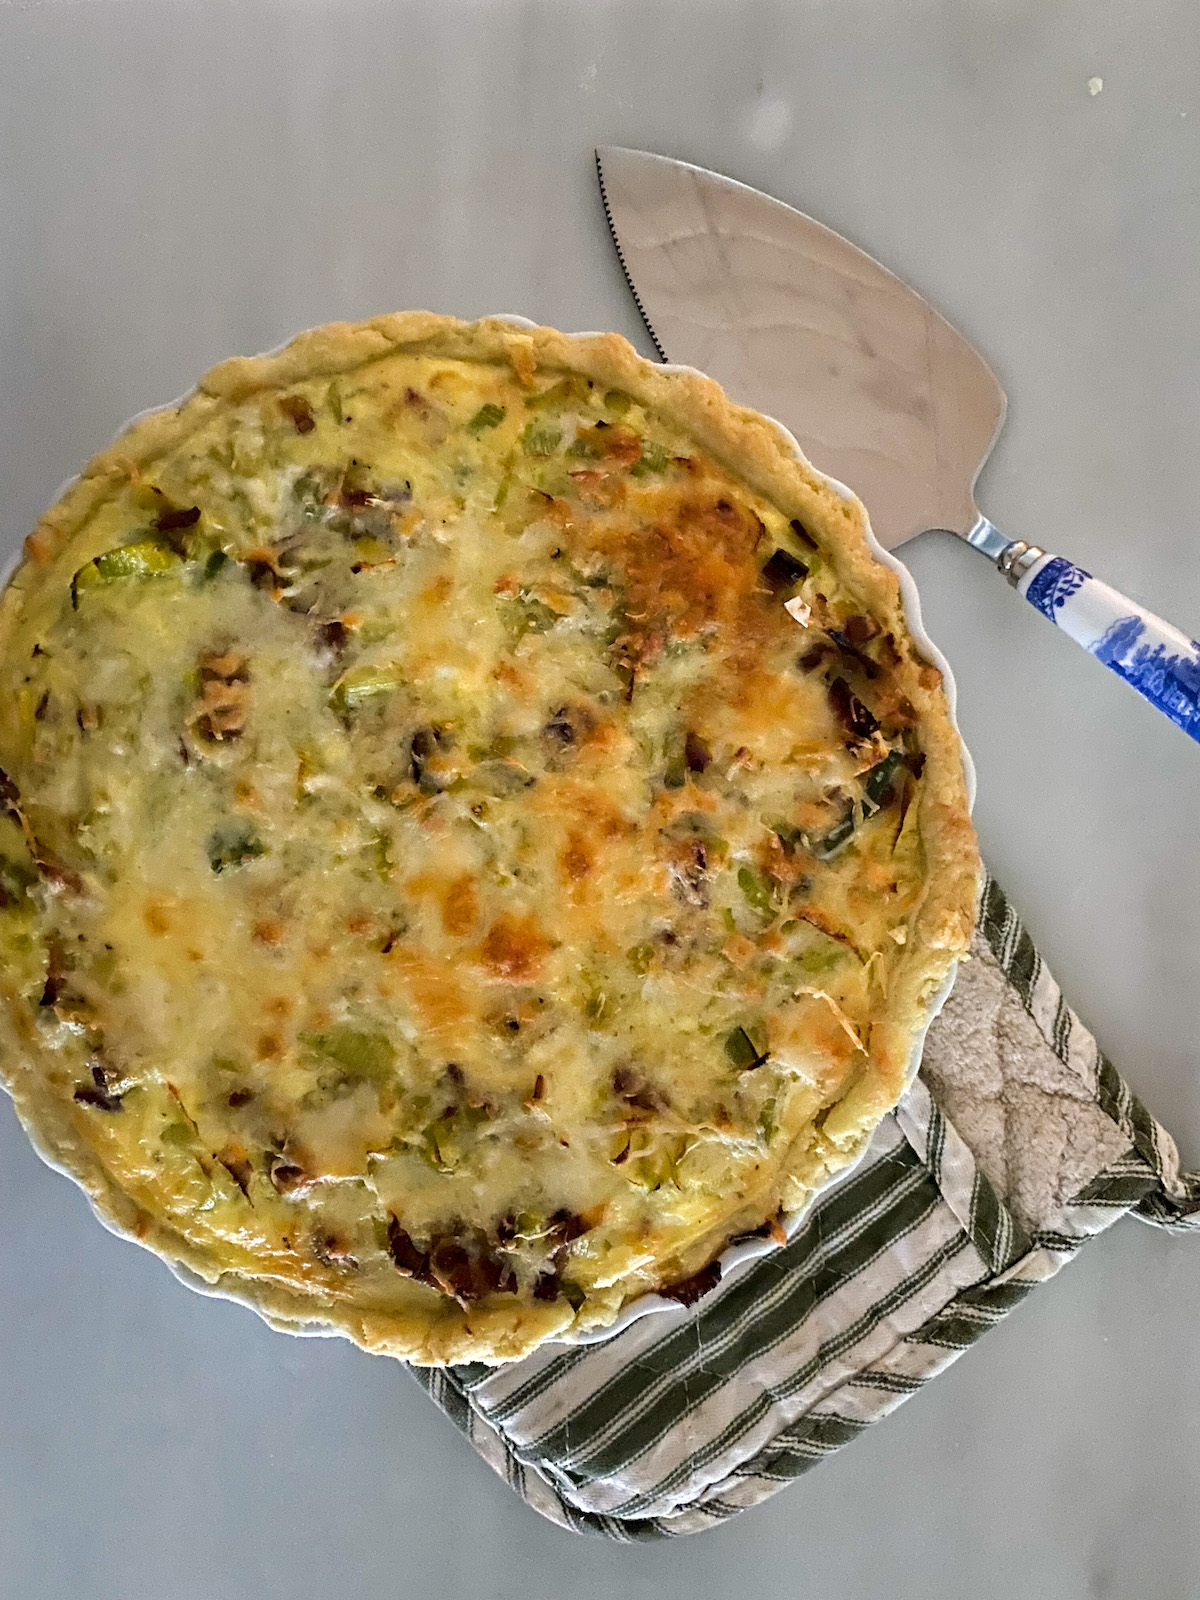 yellow green and creamy white birds eye view of quiche in a white ceramic dish on top of a green and white stripped pot holder adjacent to a blue and white handles serving utensil with a stainless steel triangular cake server white marble background